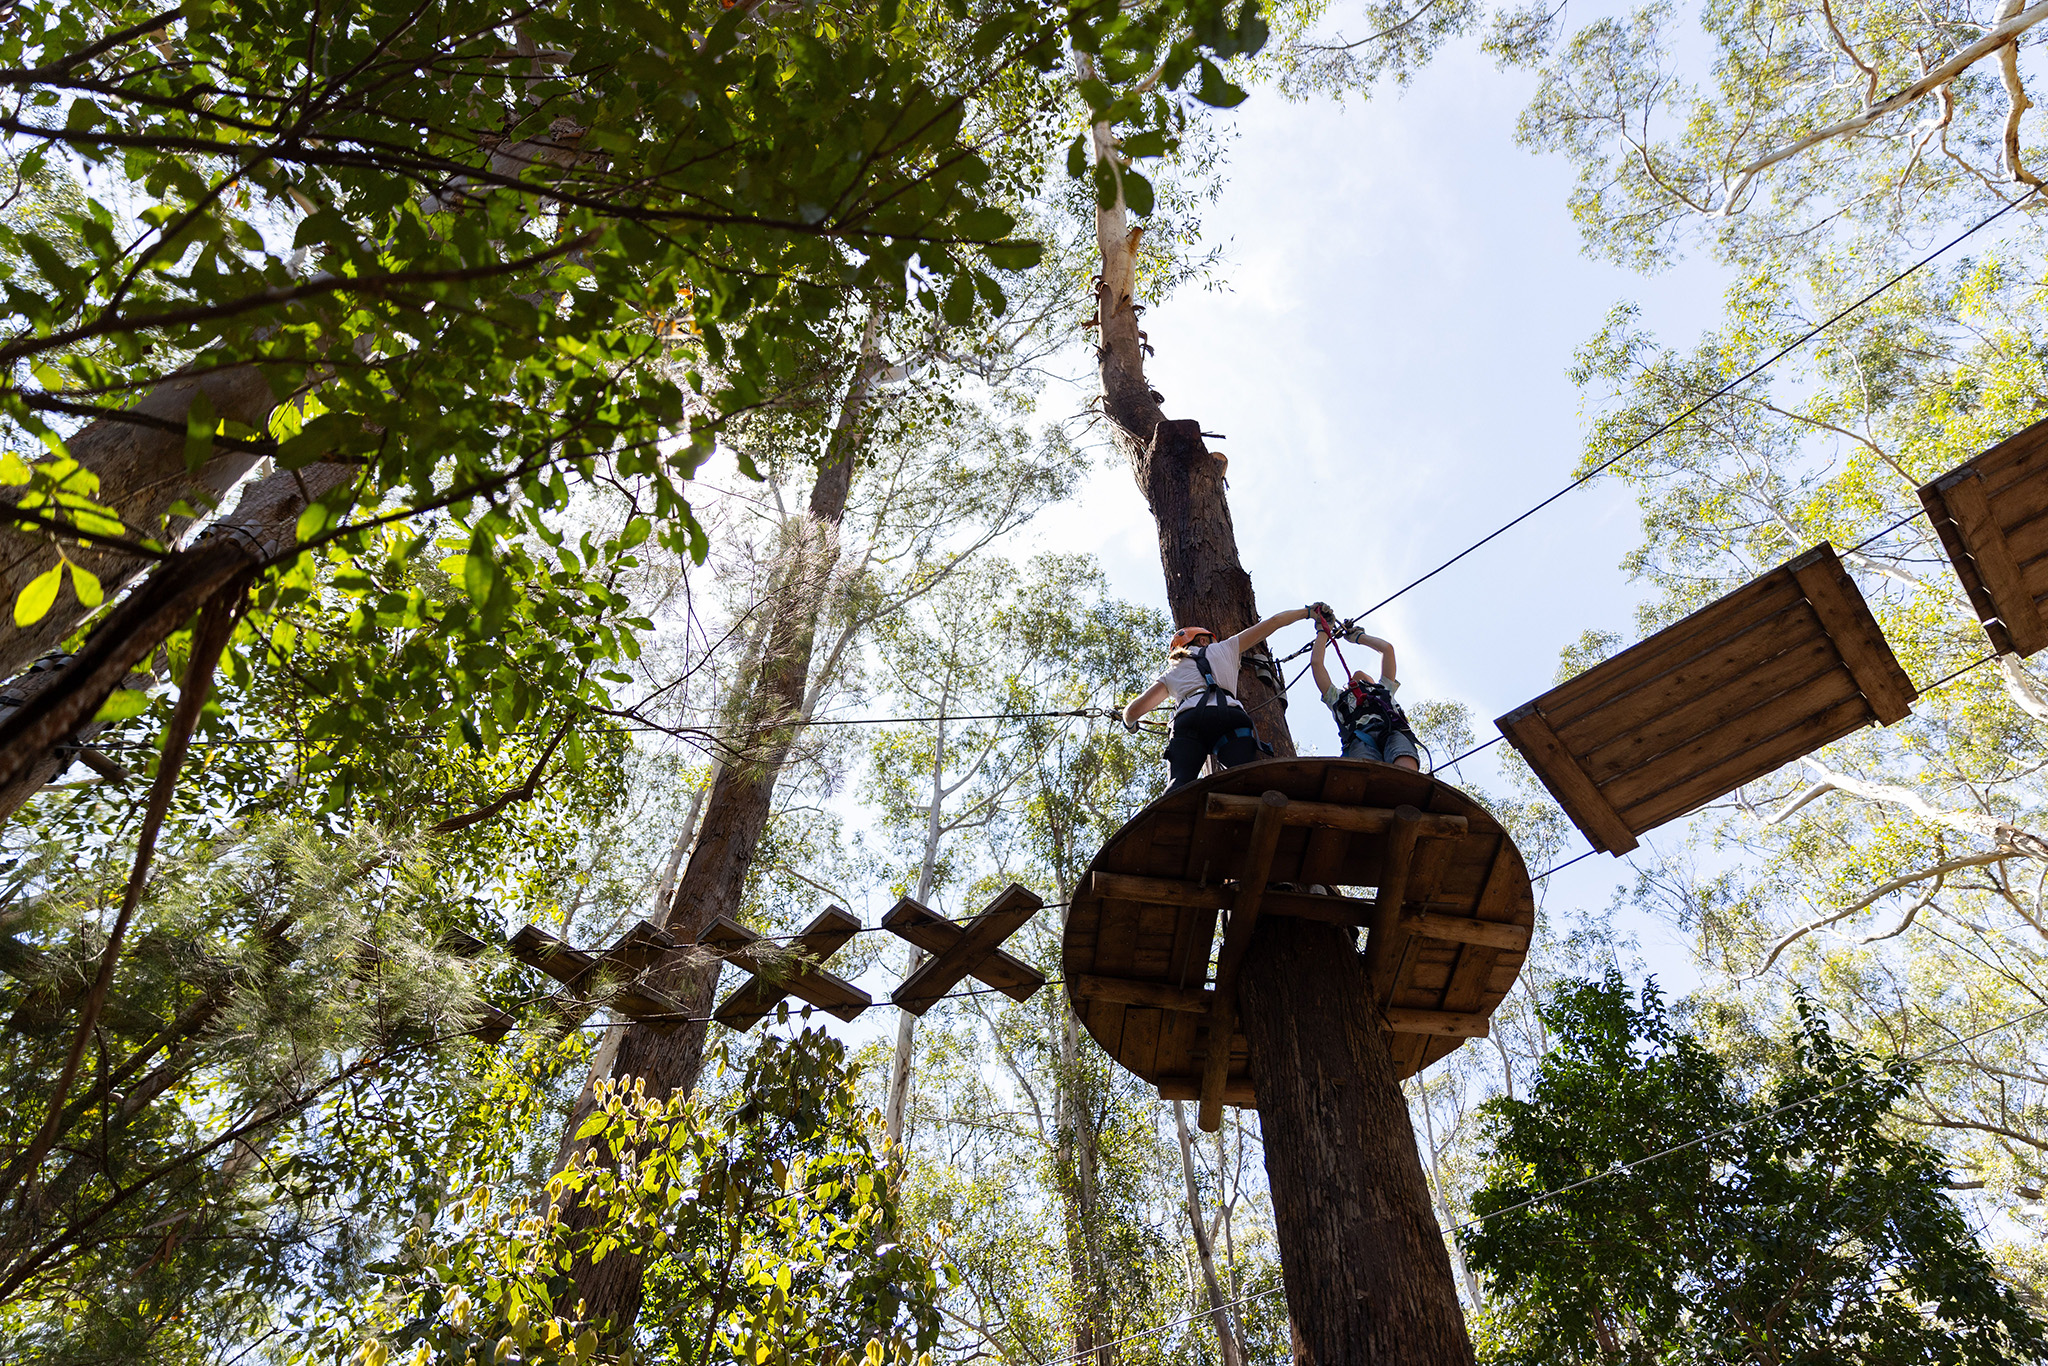 Low camera angle looking up at Treetop participants climbing trees with helmets and harnesses